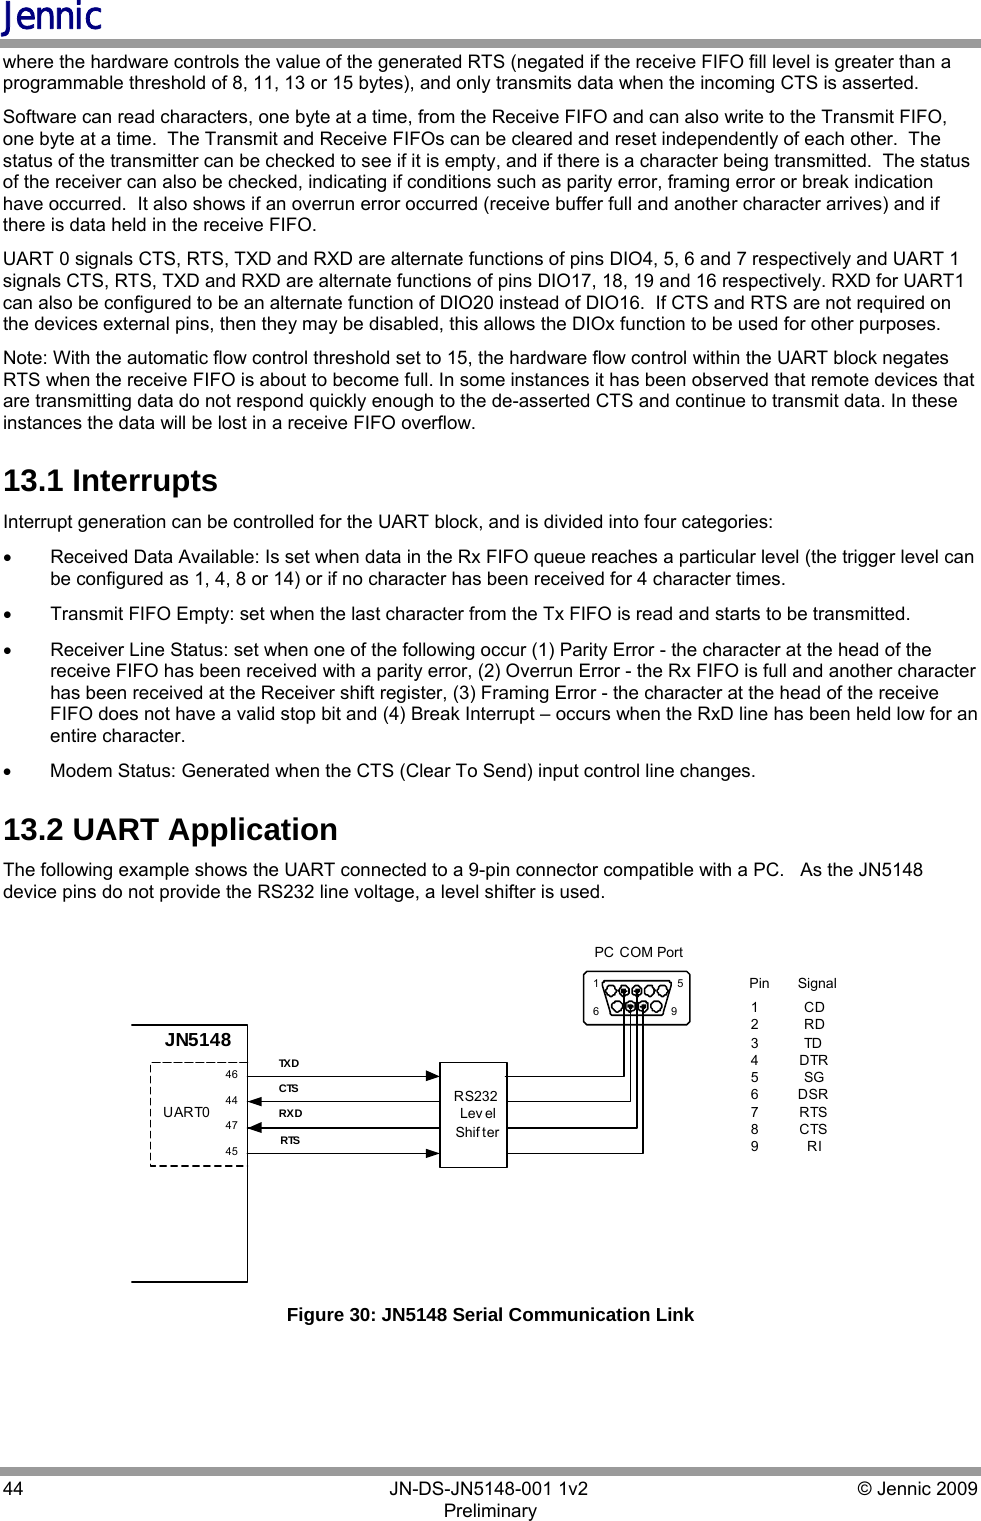 Jennic 44        JN-DS-JN5148-001 1v2  © Jennic 2009 Preliminary  where the hardware controls the value of the generated RTS (negated if the receive FIFO fill level is greater than a programmable threshold of 8, 11, 13 or 15 bytes), and only transmits data when the incoming CTS is asserted. Software can read characters, one byte at a time, from the Receive FIFO and can also write to the Transmit FIFO, one byte at a time.  The Transmit and Receive FIFOs can be cleared and reset independently of each other.  The status of the transmitter can be checked to see if it is empty, and if there is a character being transmitted.  The status of the receiver can also be checked, indicating if conditions such as parity error, framing error or break indication have occurred.  It also shows if an overrun error occurred (receive buffer full and another character arrives) and if there is data held in the receive FIFO. UART 0 signals CTS, RTS, TXD and RXD are alternate functions of pins DIO4, 5, 6 and 7 respectively and UART 1 signals CTS, RTS, TXD and RXD are alternate functions of pins DIO17, 18, 19 and 16 respectively. RXD for UART1 can also be configured to be an alternate function of DIO20 instead of DIO16.  If CTS and RTS are not required on the devices external pins, then they may be disabled, this allows the DIOx function to be used for other purposes. Note: With the automatic flow control threshold set to 15, the hardware flow control within the UART block negates RTS when the receive FIFO is about to become full. In some instances it has been observed that remote devices that are transmitting data do not respond quickly enough to the de-asserted CTS and continue to transmit data. In these instances the data will be lost in a receive FIFO overflow. 13.1 Interrupts  Interrupt generation can be controlled for the UART block, and is divided into four categories: •  Received Data Available: Is set when data in the Rx FIFO queue reaches a particular level (the trigger level can be configured as 1, 4, 8 or 14) or if no character has been received for 4 character times. •  Transmit FIFO Empty: set when the last character from the Tx FIFO is read and starts to be transmitted. •  Receiver Line Status: set when one of the following occur (1) Parity Error - the character at the head of the receive FIFO has been received with a parity error, (2) Overrun Error - the Rx FIFO is full and another character has been received at the Receiver shift register, (3) Framing Error - the character at the head of the receive FIFO does not have a valid stop bit and (4) Break Interrupt – occurs when the RxD line has been held low for an entire character. •  Modem Status: Generated when the CTS (Clear To Send) input control line changes. 13.2 UART Application The following example shows the UART connected to a 9-pin connector compatible with a PC.   As the JN5148 device pins do not provide the RS232 line voltage, a level shifter is used. JN5148 RTS  CTS  TX D  RXD UART0 RS232 Lev el Shif ter 1 2 3 4 5 6 7 8 9 CD RD TD DTR SG DSR RTS CTS RI PC COM Port Pin Signal 1 5 6 9 46 47 45 44  Figure 30: JN5148 Serial Communication Link 